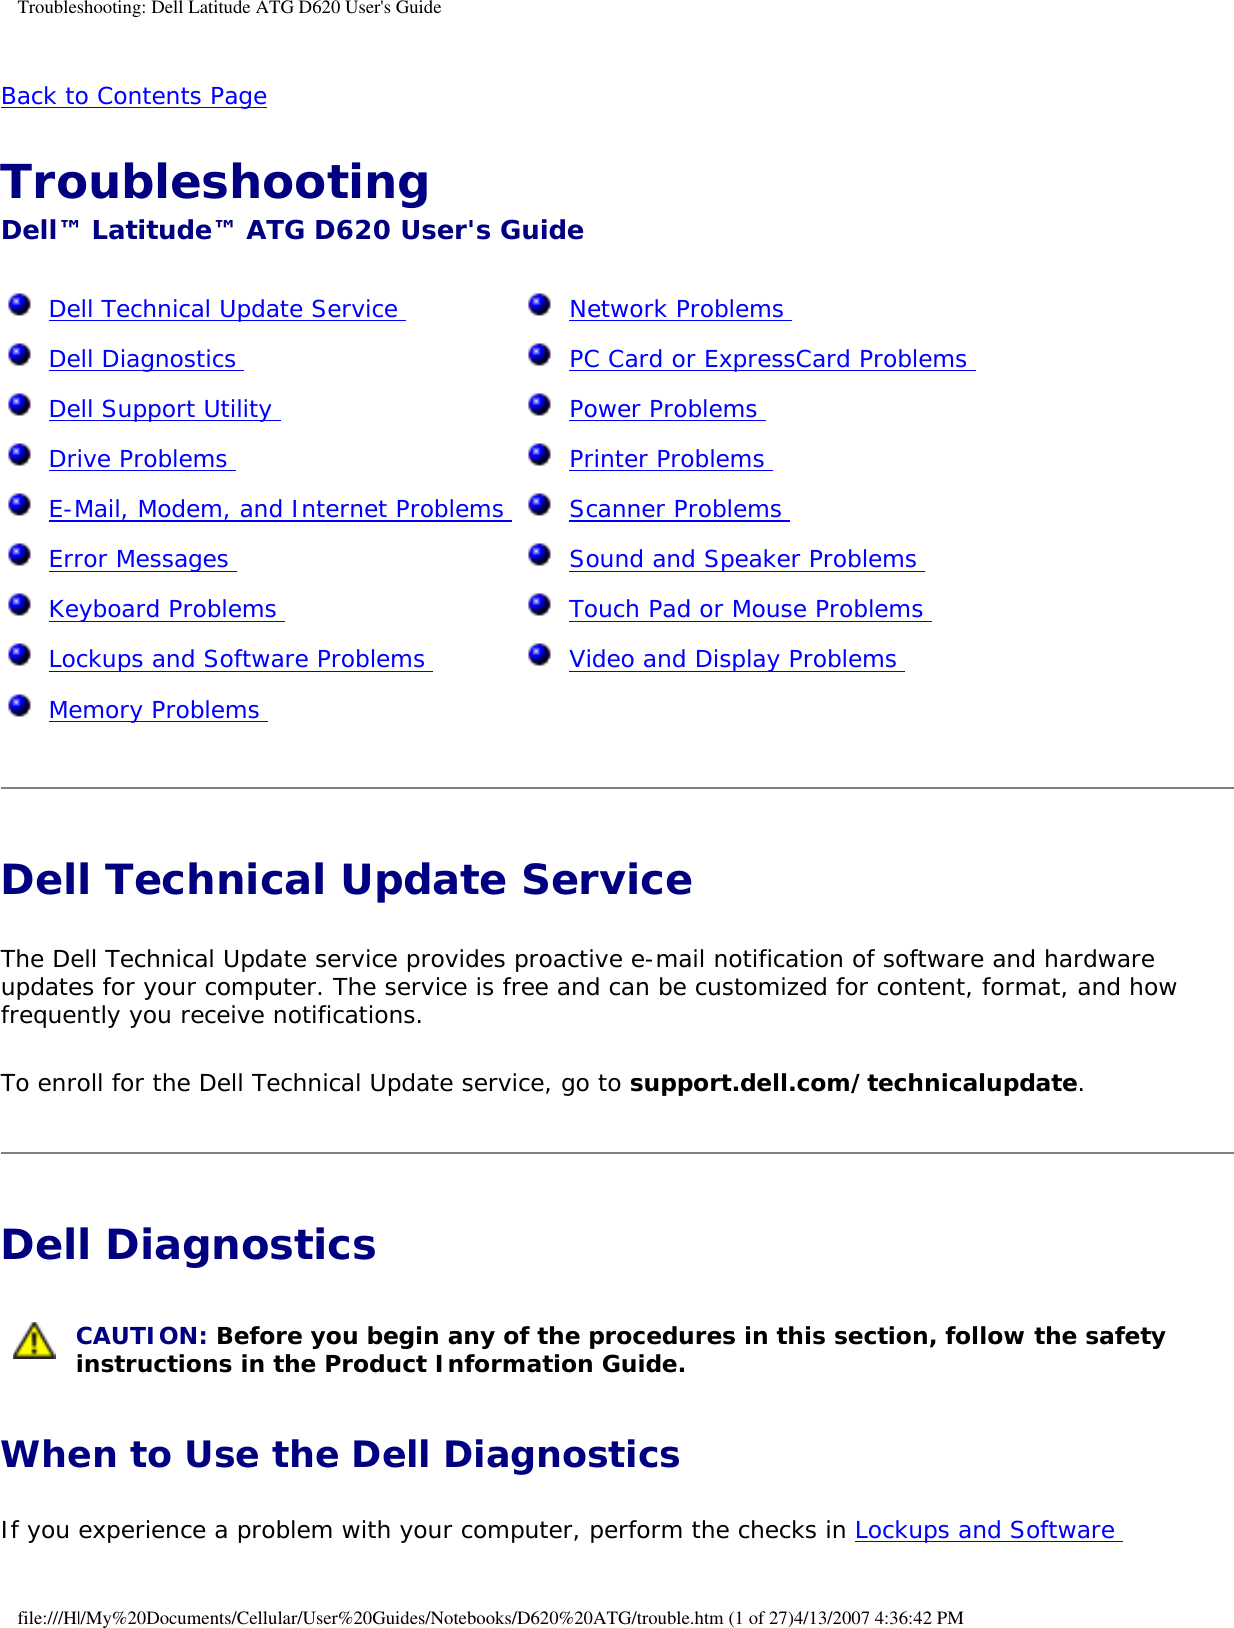 Troubleshooting: Dell Latitude ATG D620 User&apos;s GuideBack to Contents Page Troubleshooting Dell™ Latitude™ ATG D620 User&apos;s Guide  Dell Technical Update Service   Dell Diagnostics   Dell Support Utility   Drive Problems   E-Mail, Modem, and Internet Problems   Error Messages   Keyboard Problems   Lockups and Software Problems   Memory Problems   Network Problems   PC Card or ExpressCard Problems   Power Problems   Printer Problems   Scanner Problems   Sound and Speaker Problems   Touch Pad or Mouse Problems   Video and Display Problems  Dell Technical Update Service The Dell Technical Update service provides proactive e-mail notification of software and hardware updates for your computer. The service is free and can be customized for content, format, and how frequently you receive notifications.To enroll for the Dell Technical Update service, go to support.dell.com/technicalupdate.Dell Diagnostics  CAUTION: Before you begin any of the procedures in this section, follow the safety instructions in the Product Information Guide. When to Use the Dell DiagnosticsIf you experience a problem with your computer, perform the checks in Lockups and Software file:///H|/My%20Documents/Cellular/User%20Guides/Notebooks/D620%20ATG/trouble.htm (1 of 27)4/13/2007 4:36:42 PM